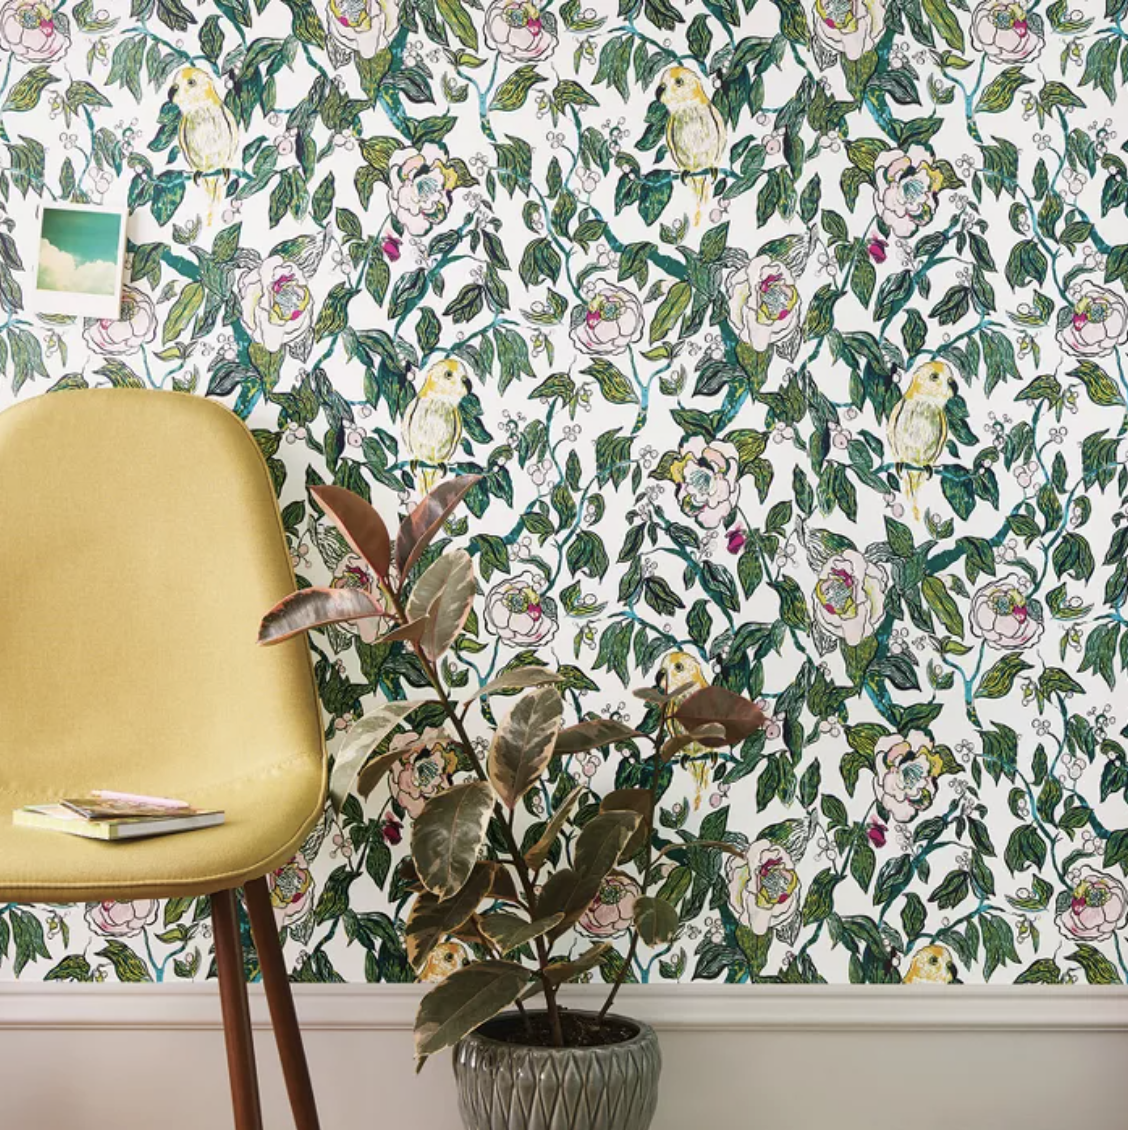 Yellow Canary and pink floral wallpaper behind yellow chair and plant